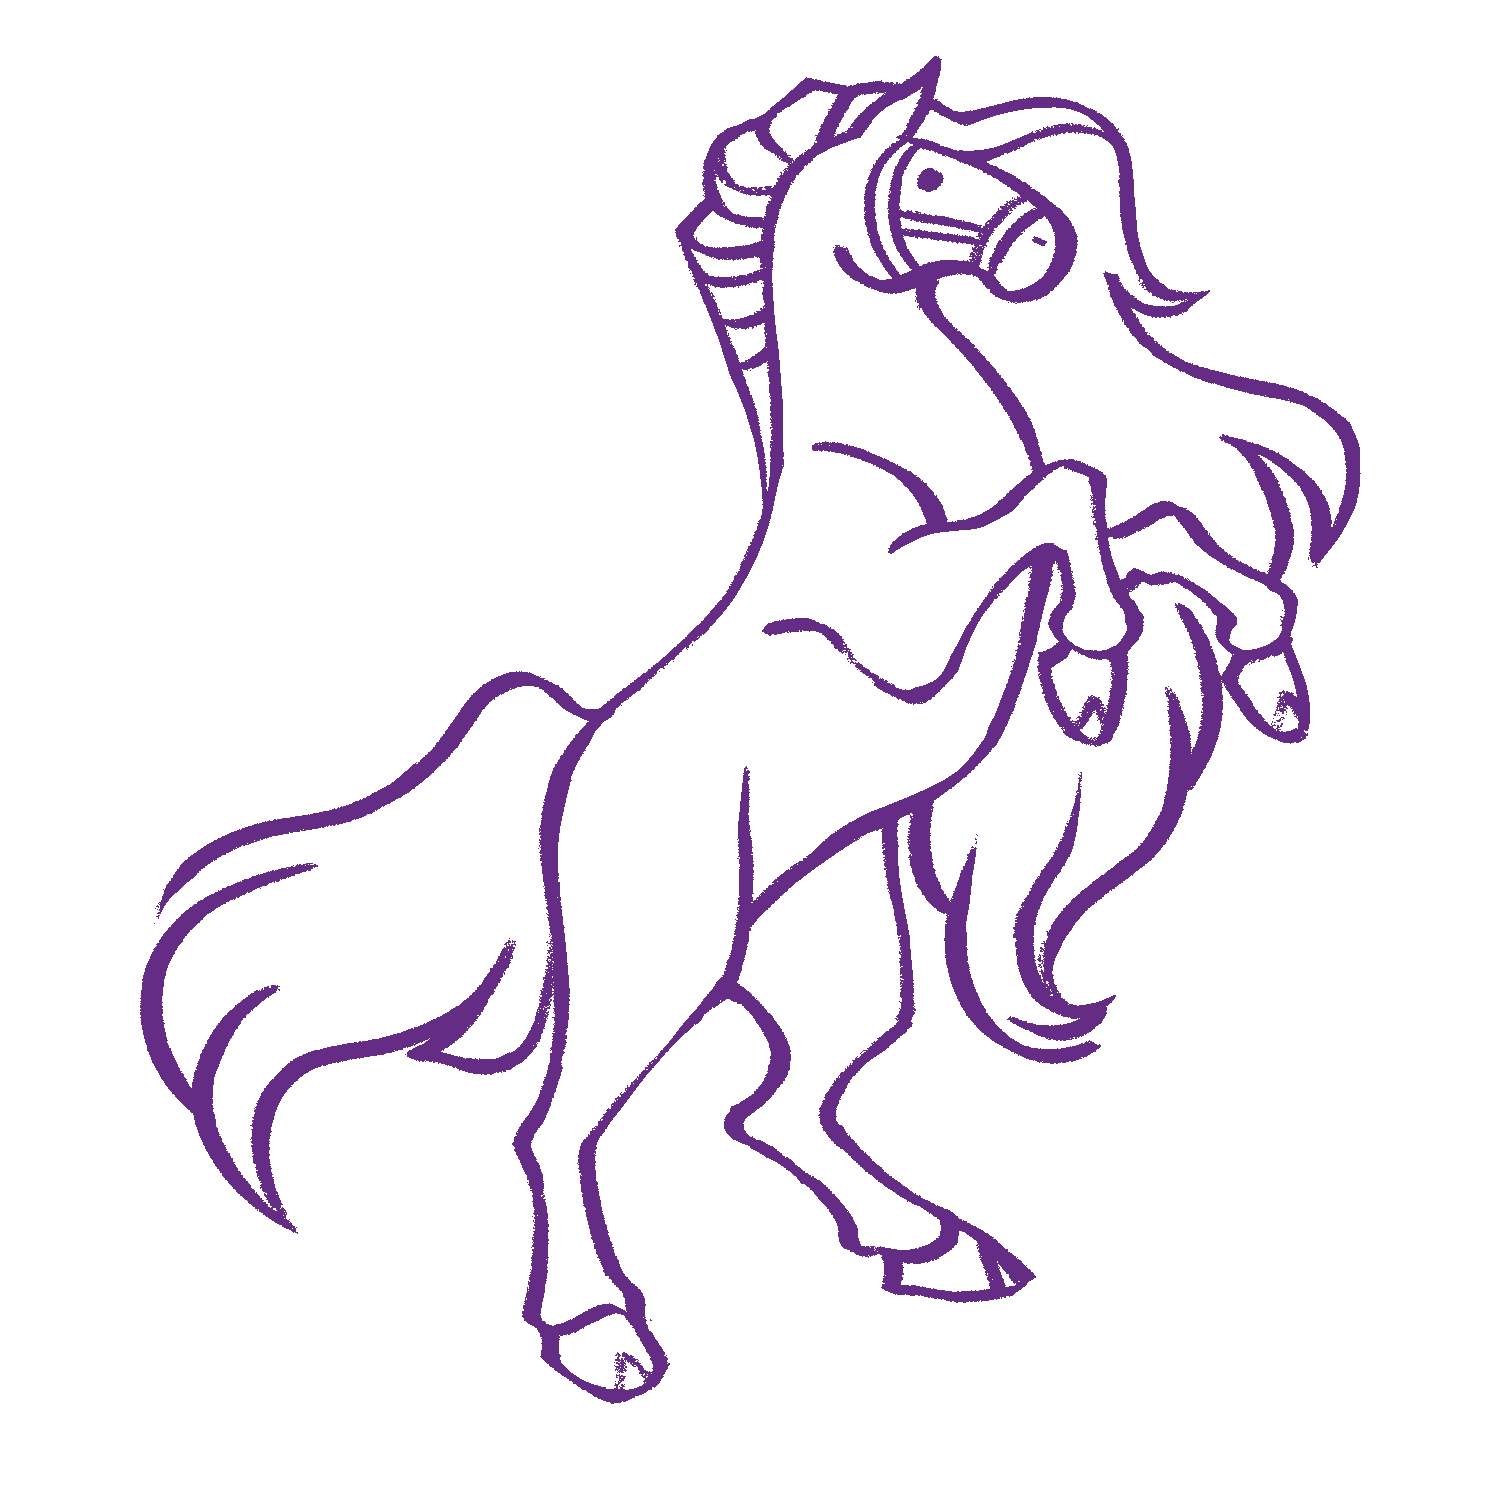 An illustration of the Noble Steed Games brand mascot, Horsey, rearing up on its hind legs.